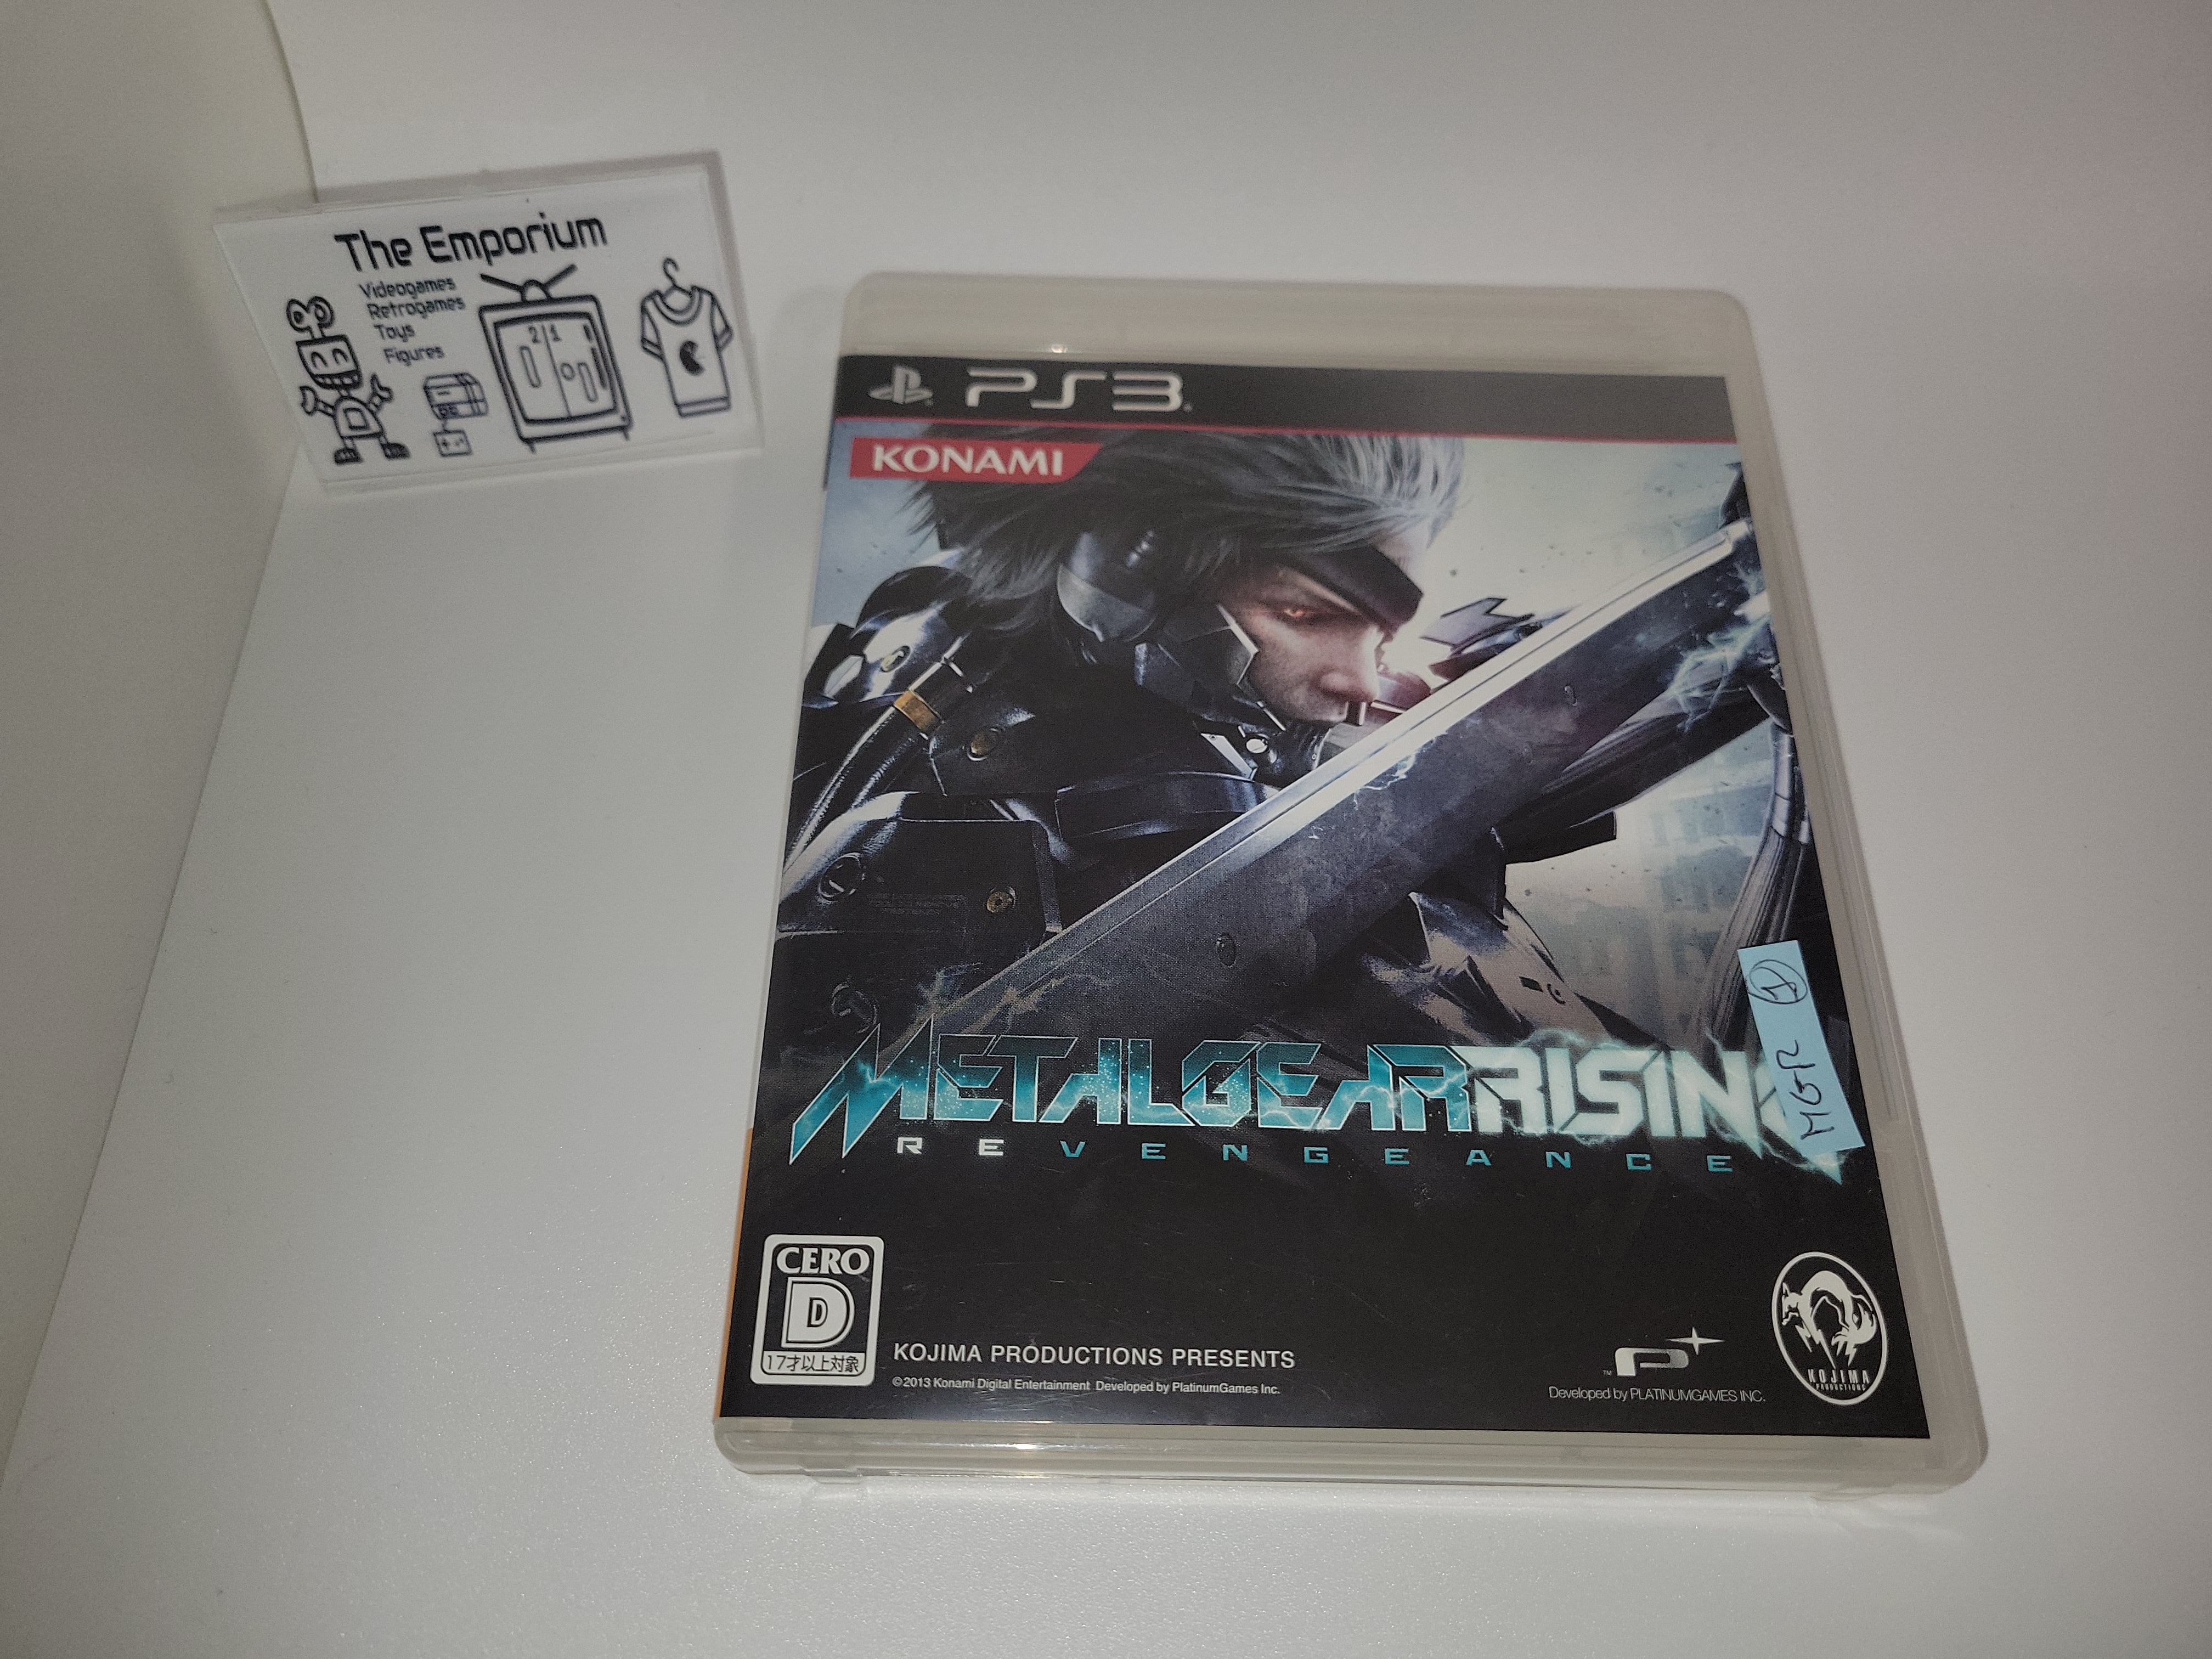 Metal Gear Rising Revengeance Ps3 For Playstation 3 Video Game Ps4 Ps5 Sony  Console 3 4 5 X Controller - Game Deals - AliExpress